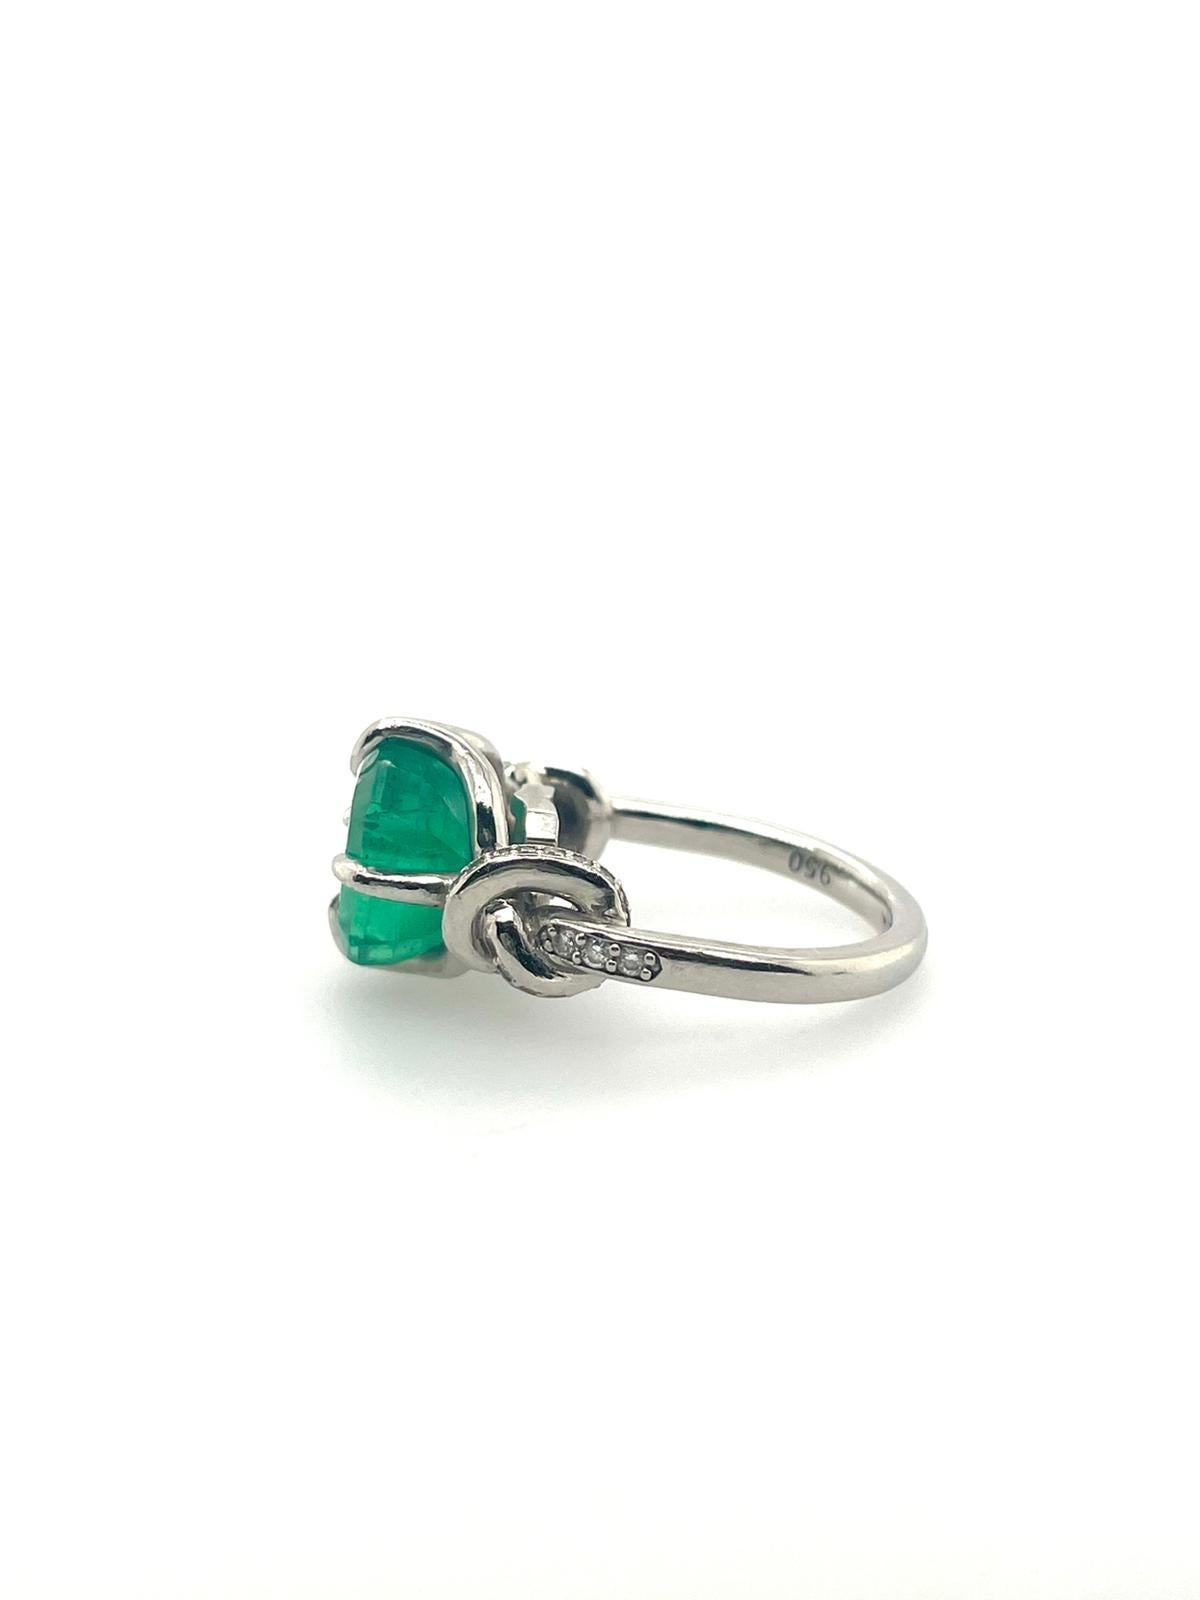 For Sale:  4ct Emerald solitaire in platinum with diamond knots  6